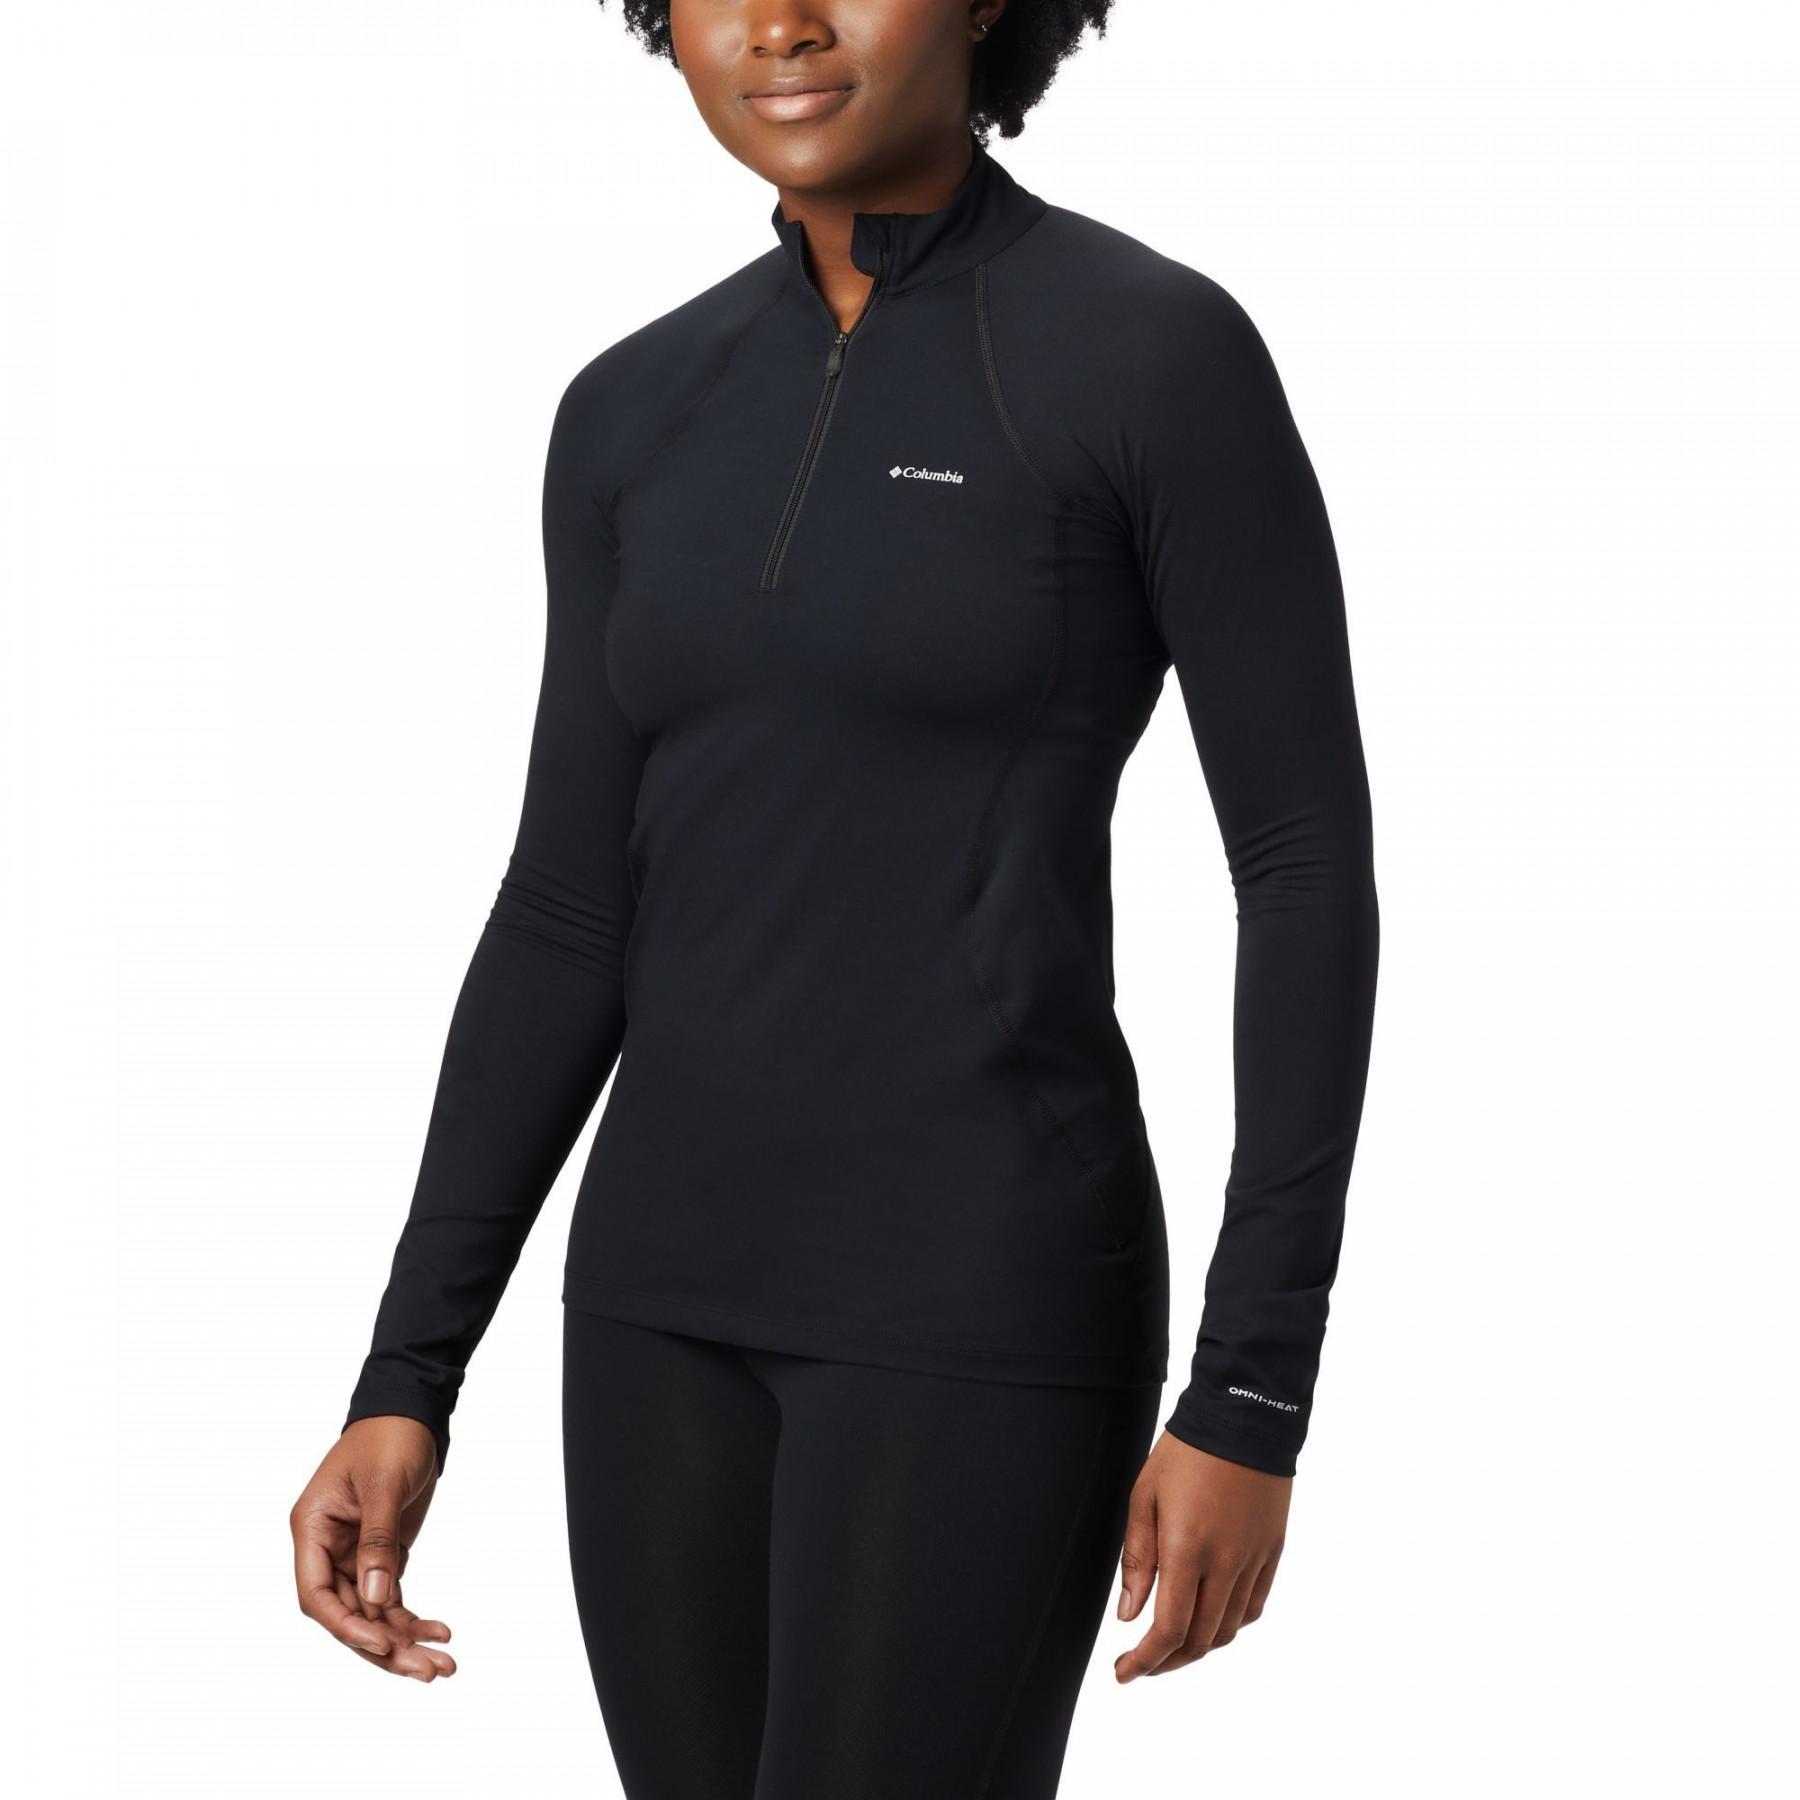 Women's 1/2 zip compression jersey Columbia Midweight